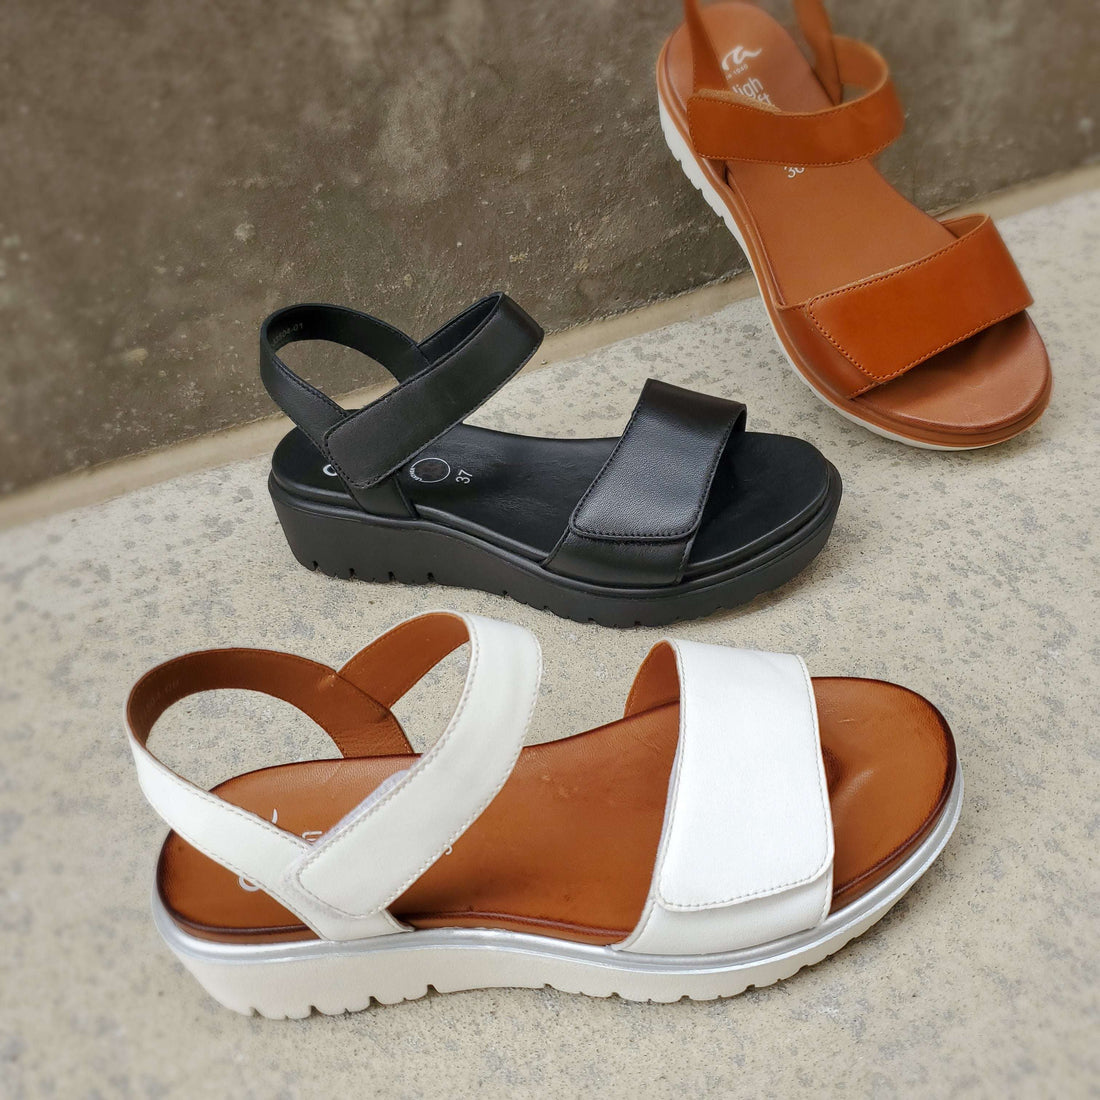 Sandals, Sneakers and Handbags for your Summer Events, plum-bottom